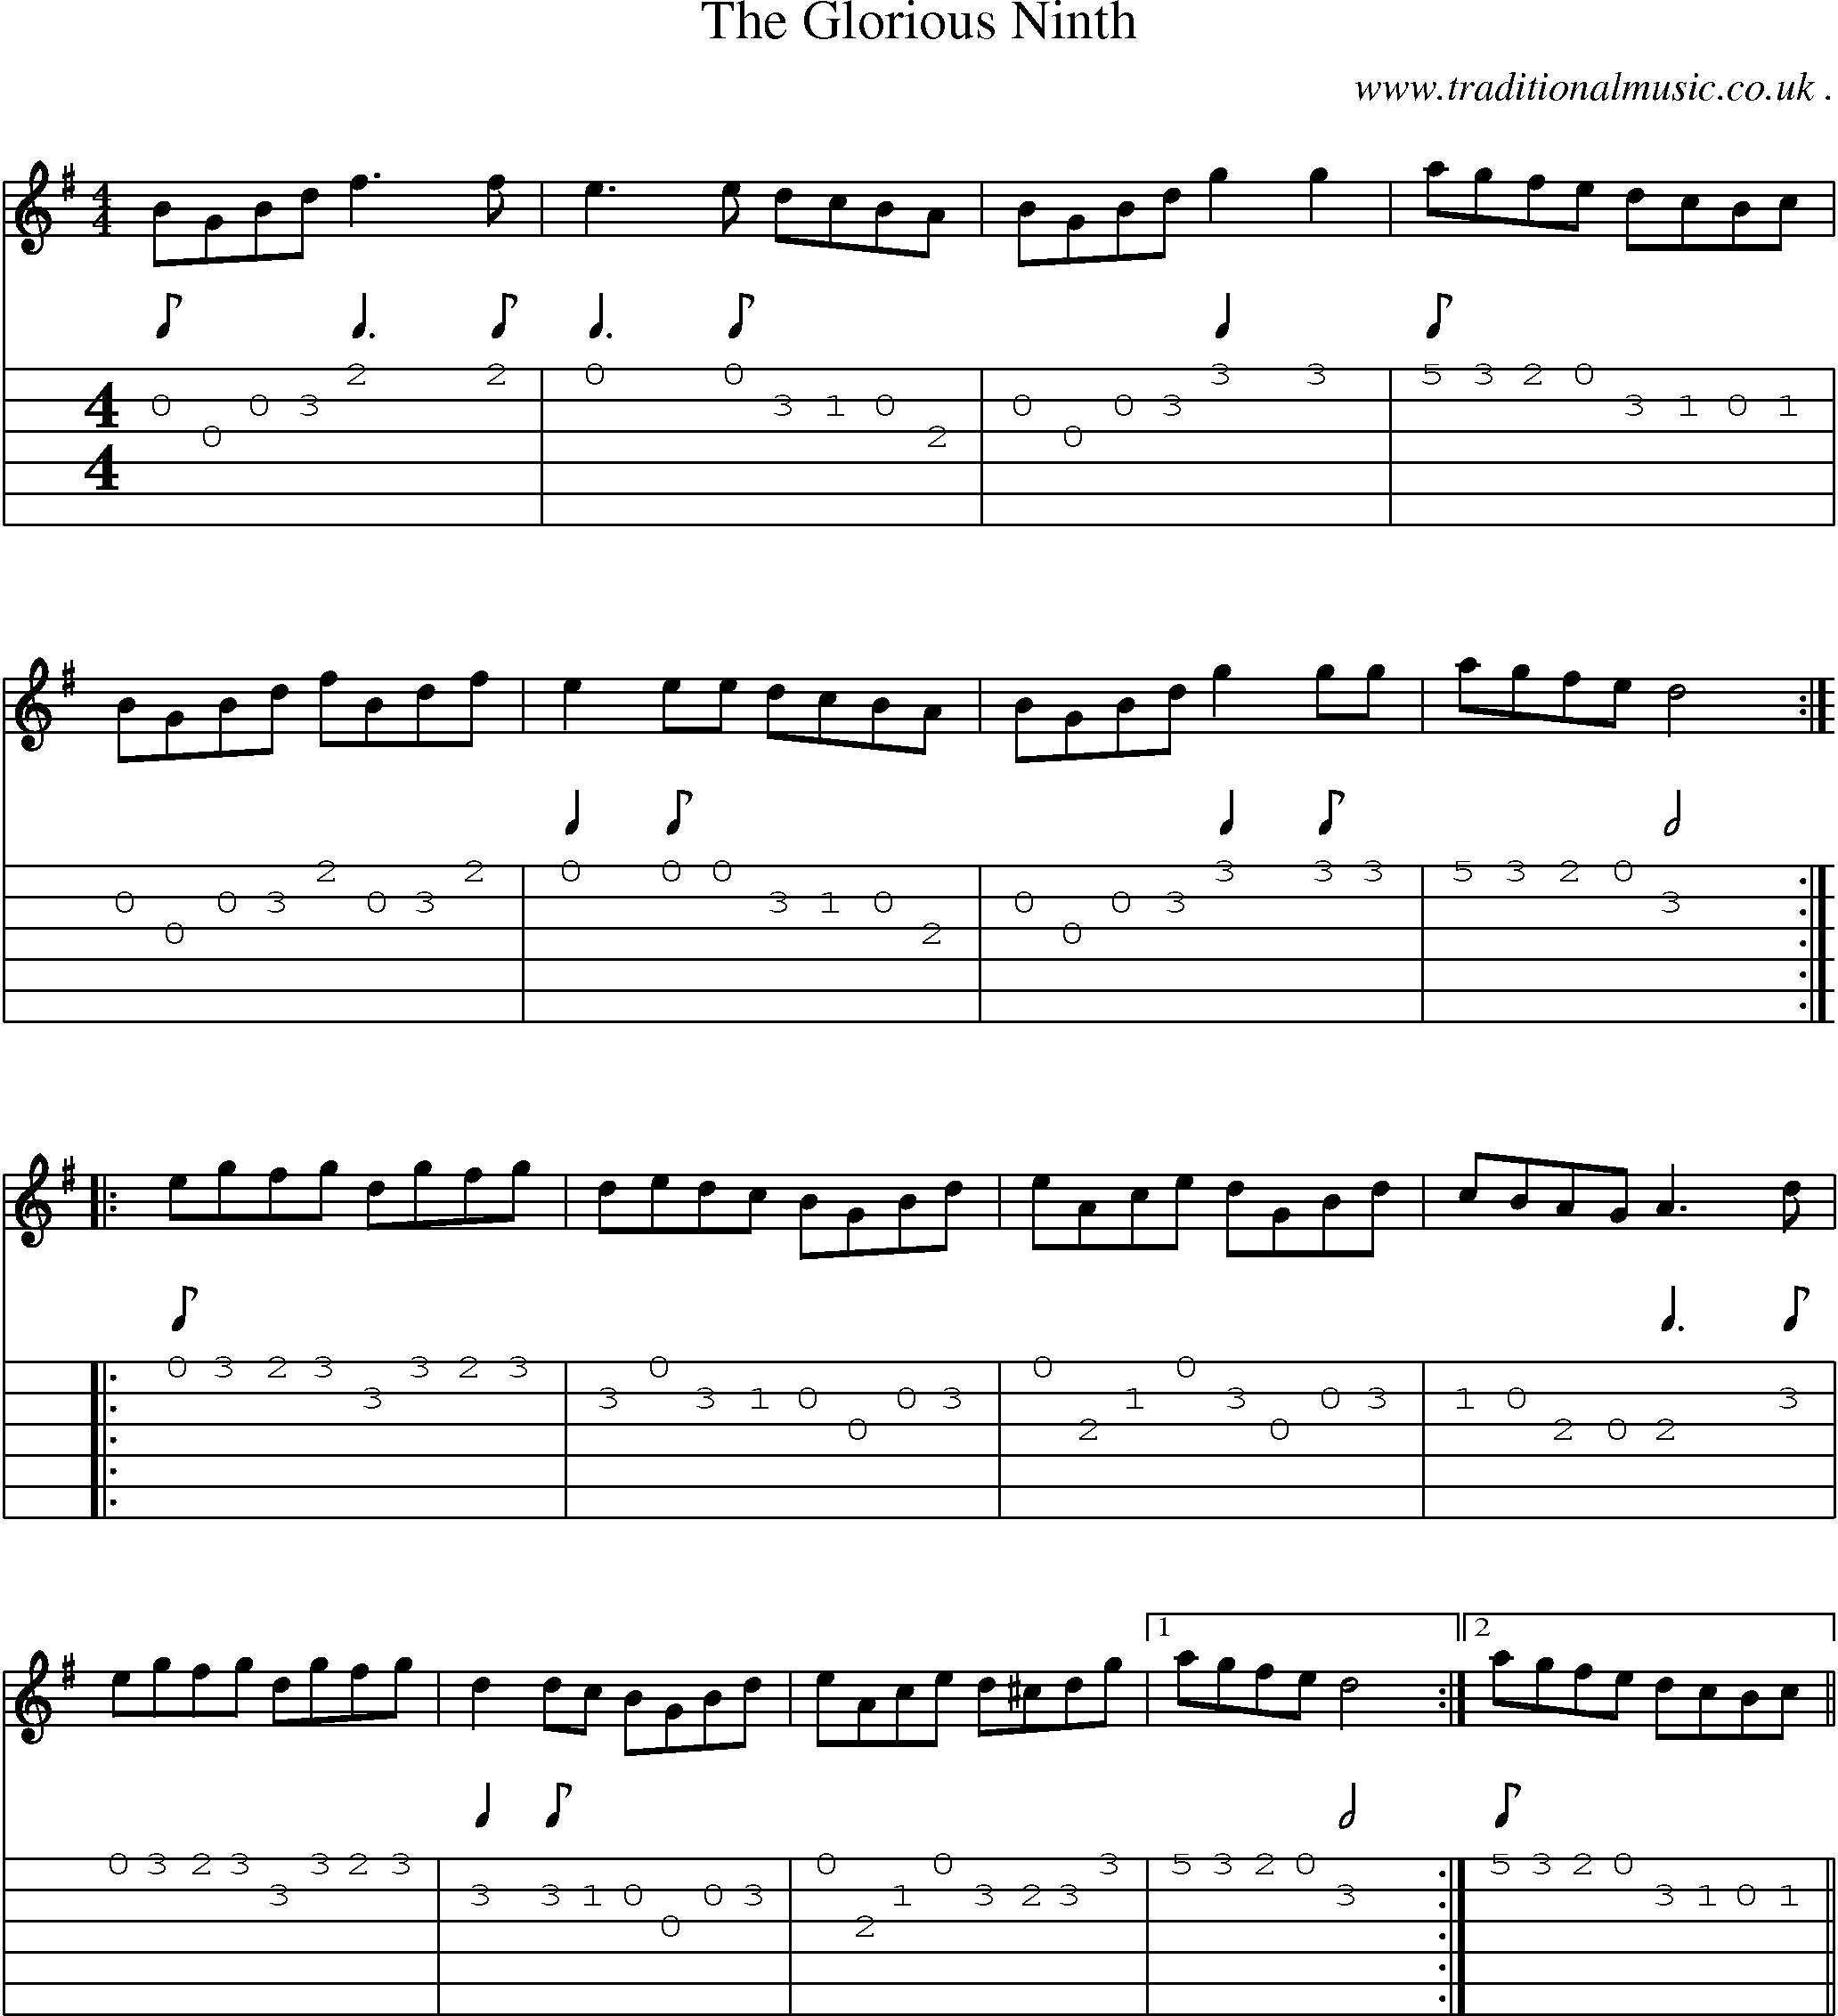 Sheet-Music and Guitar Tabs for The Glorious Ninth